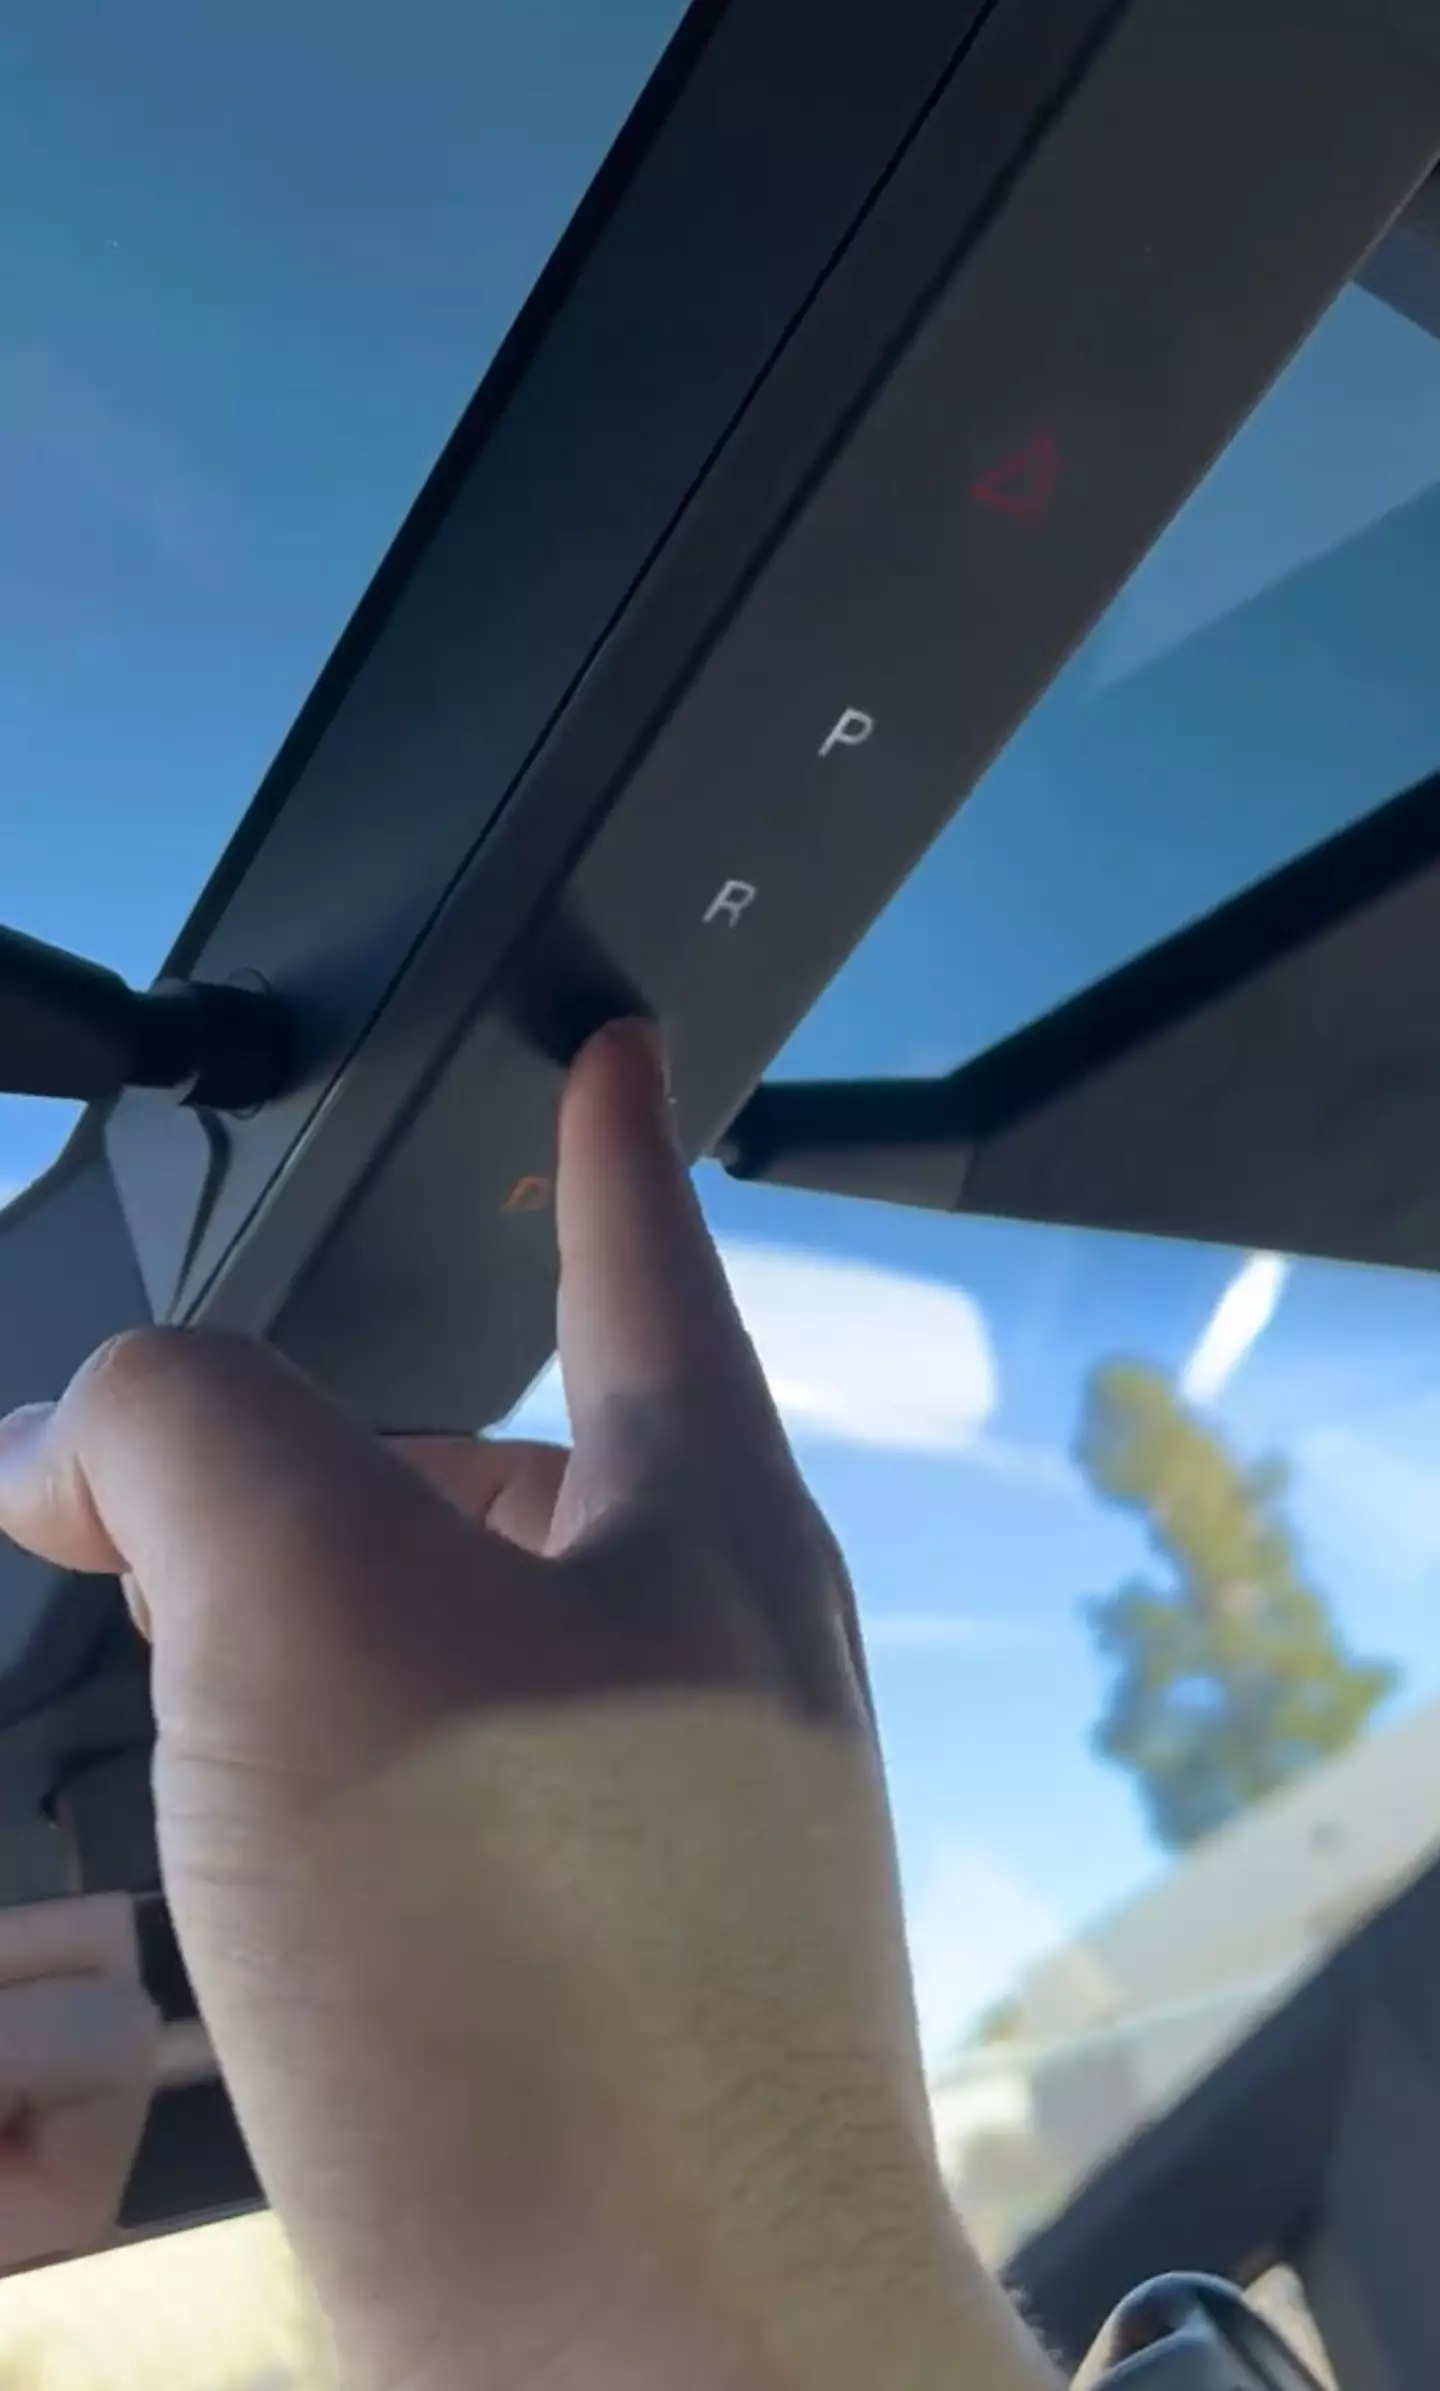 The gears can be found on a touchscreen above the driver.